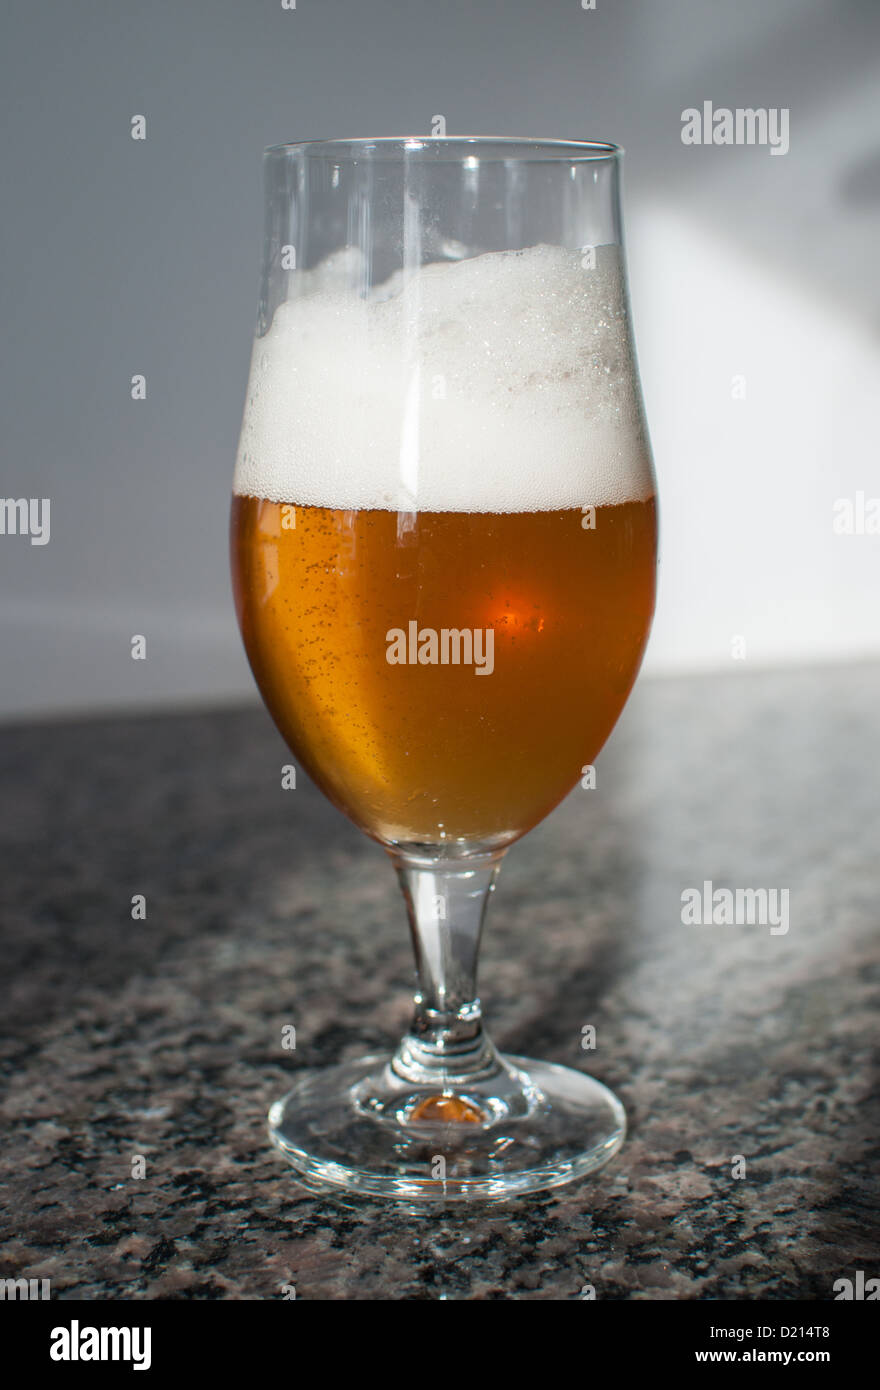 Beer in a glass with foam Stock Photo